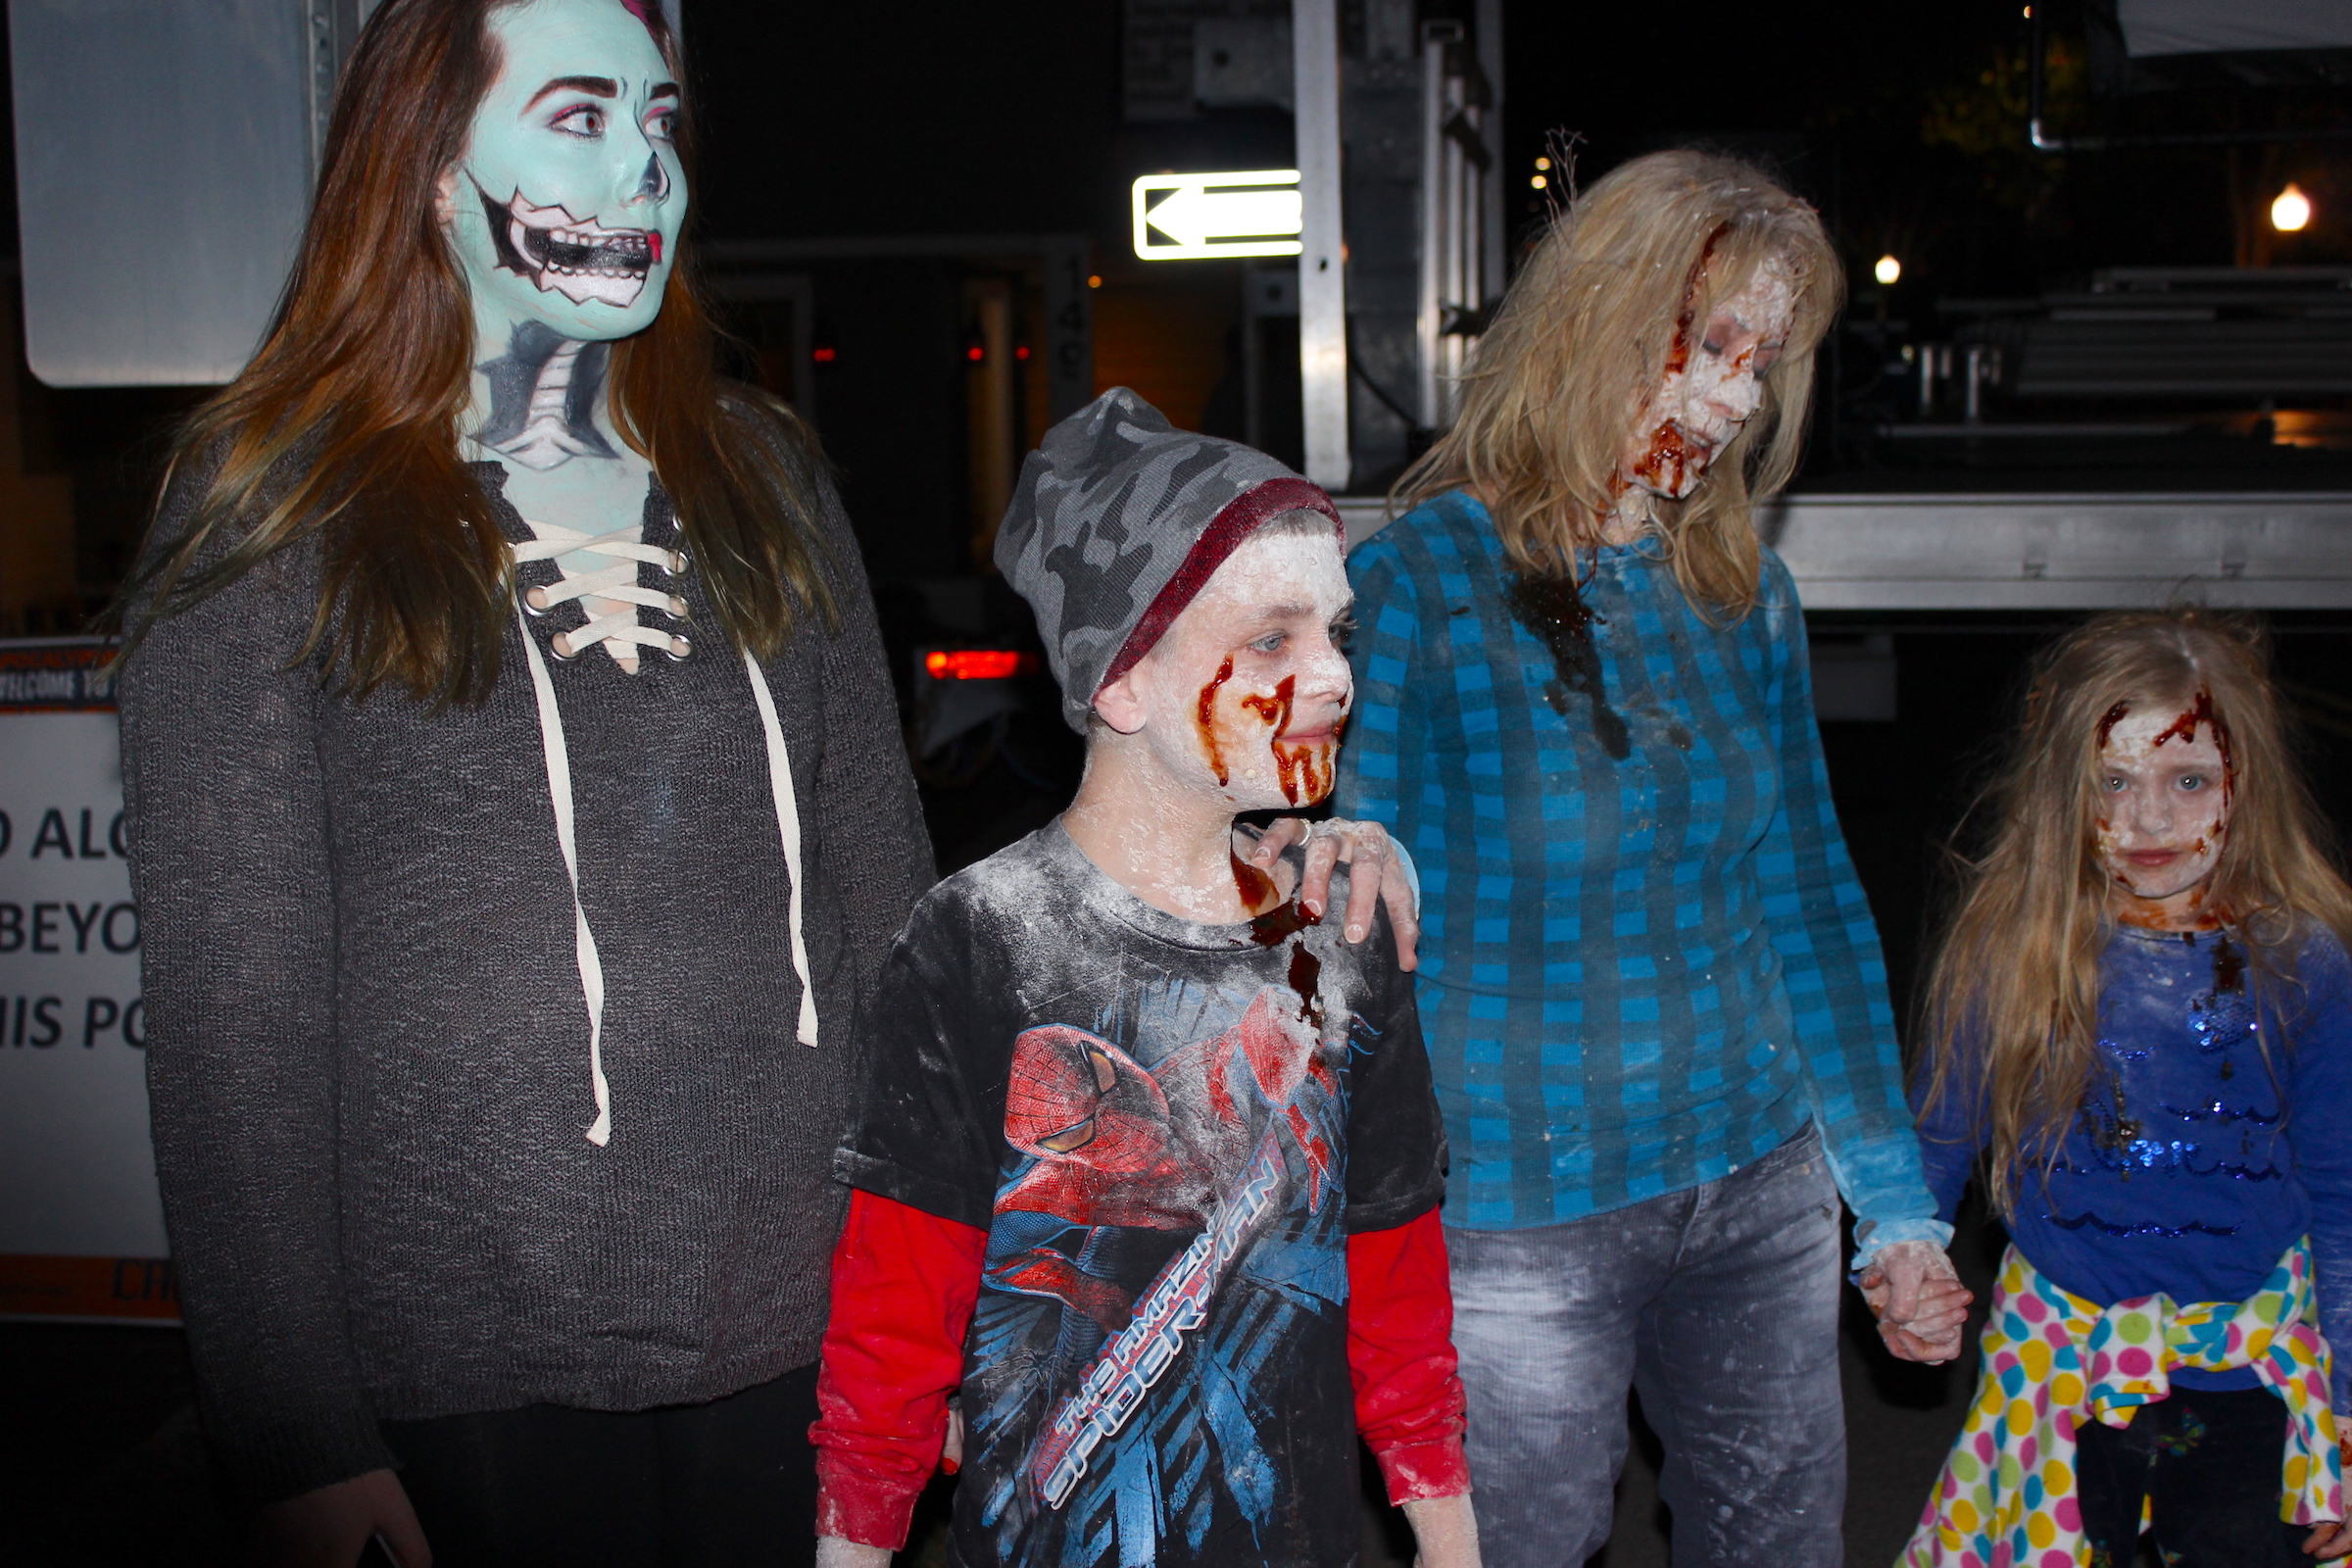 The family friendly Zombiepalooza outdoor block party takes place in downtown Cary, N.C. on October 27.